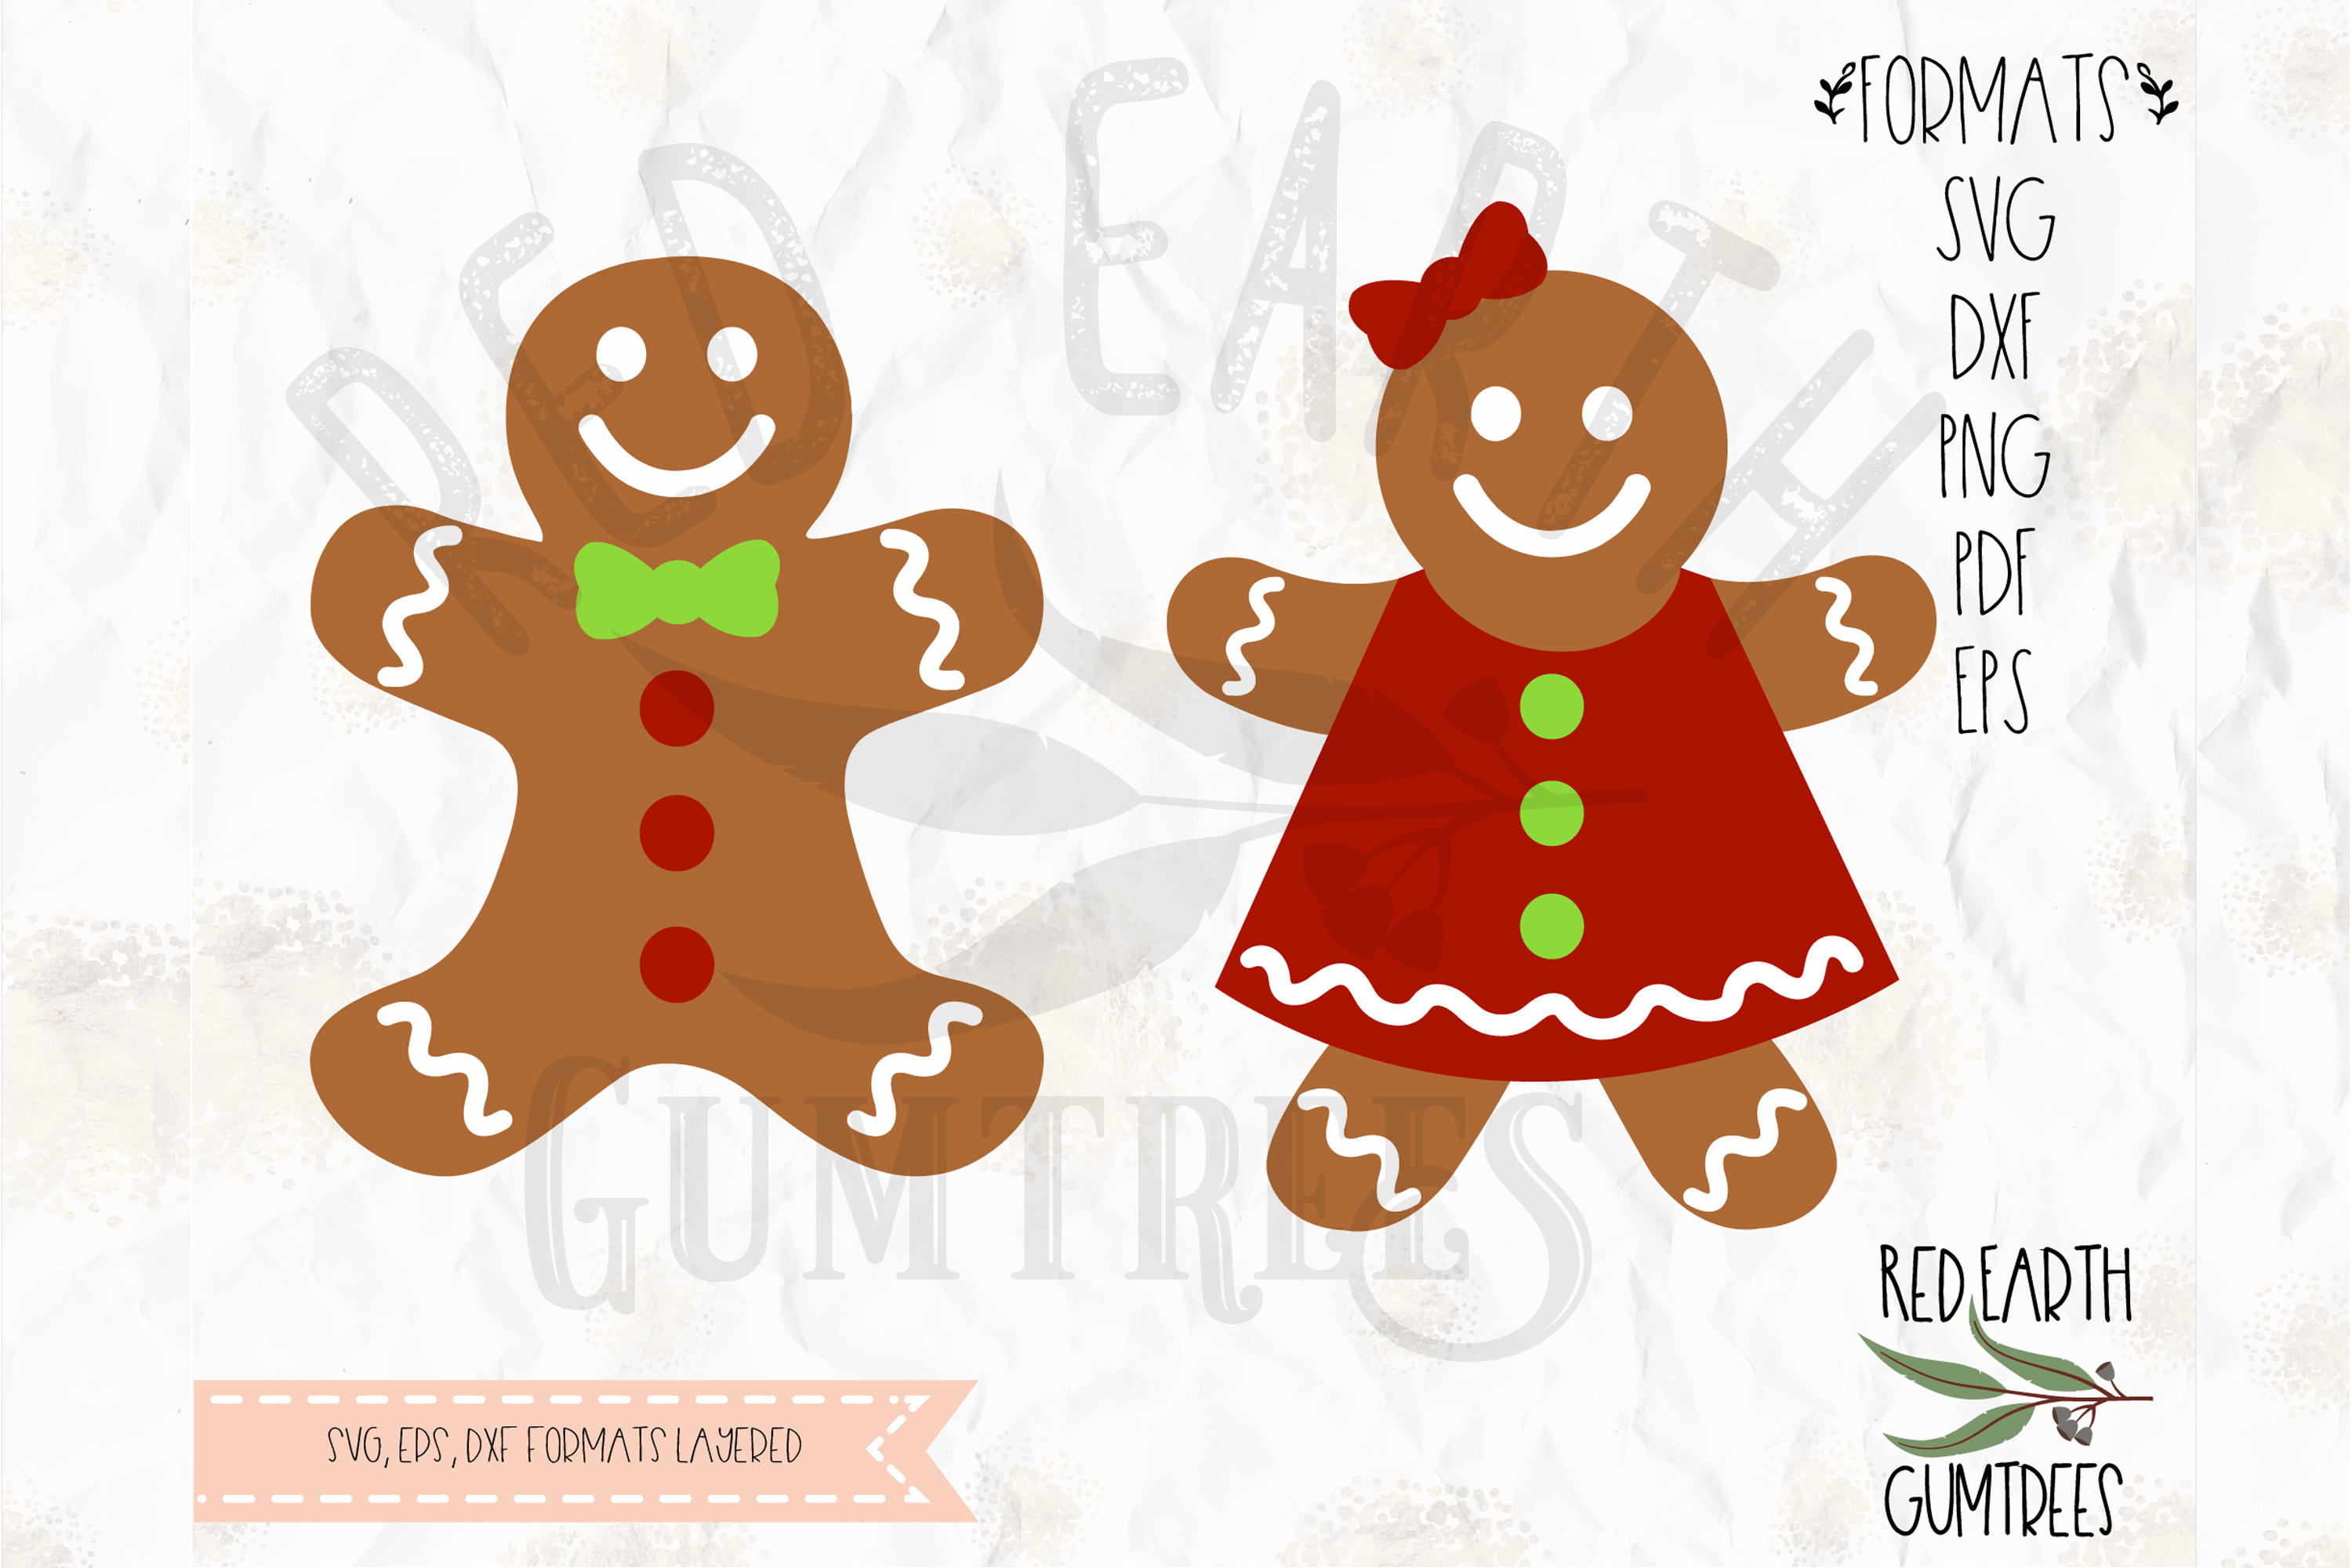 Gingerbread man, Gingerbread woman in SVG, DXF,PNG, EPS